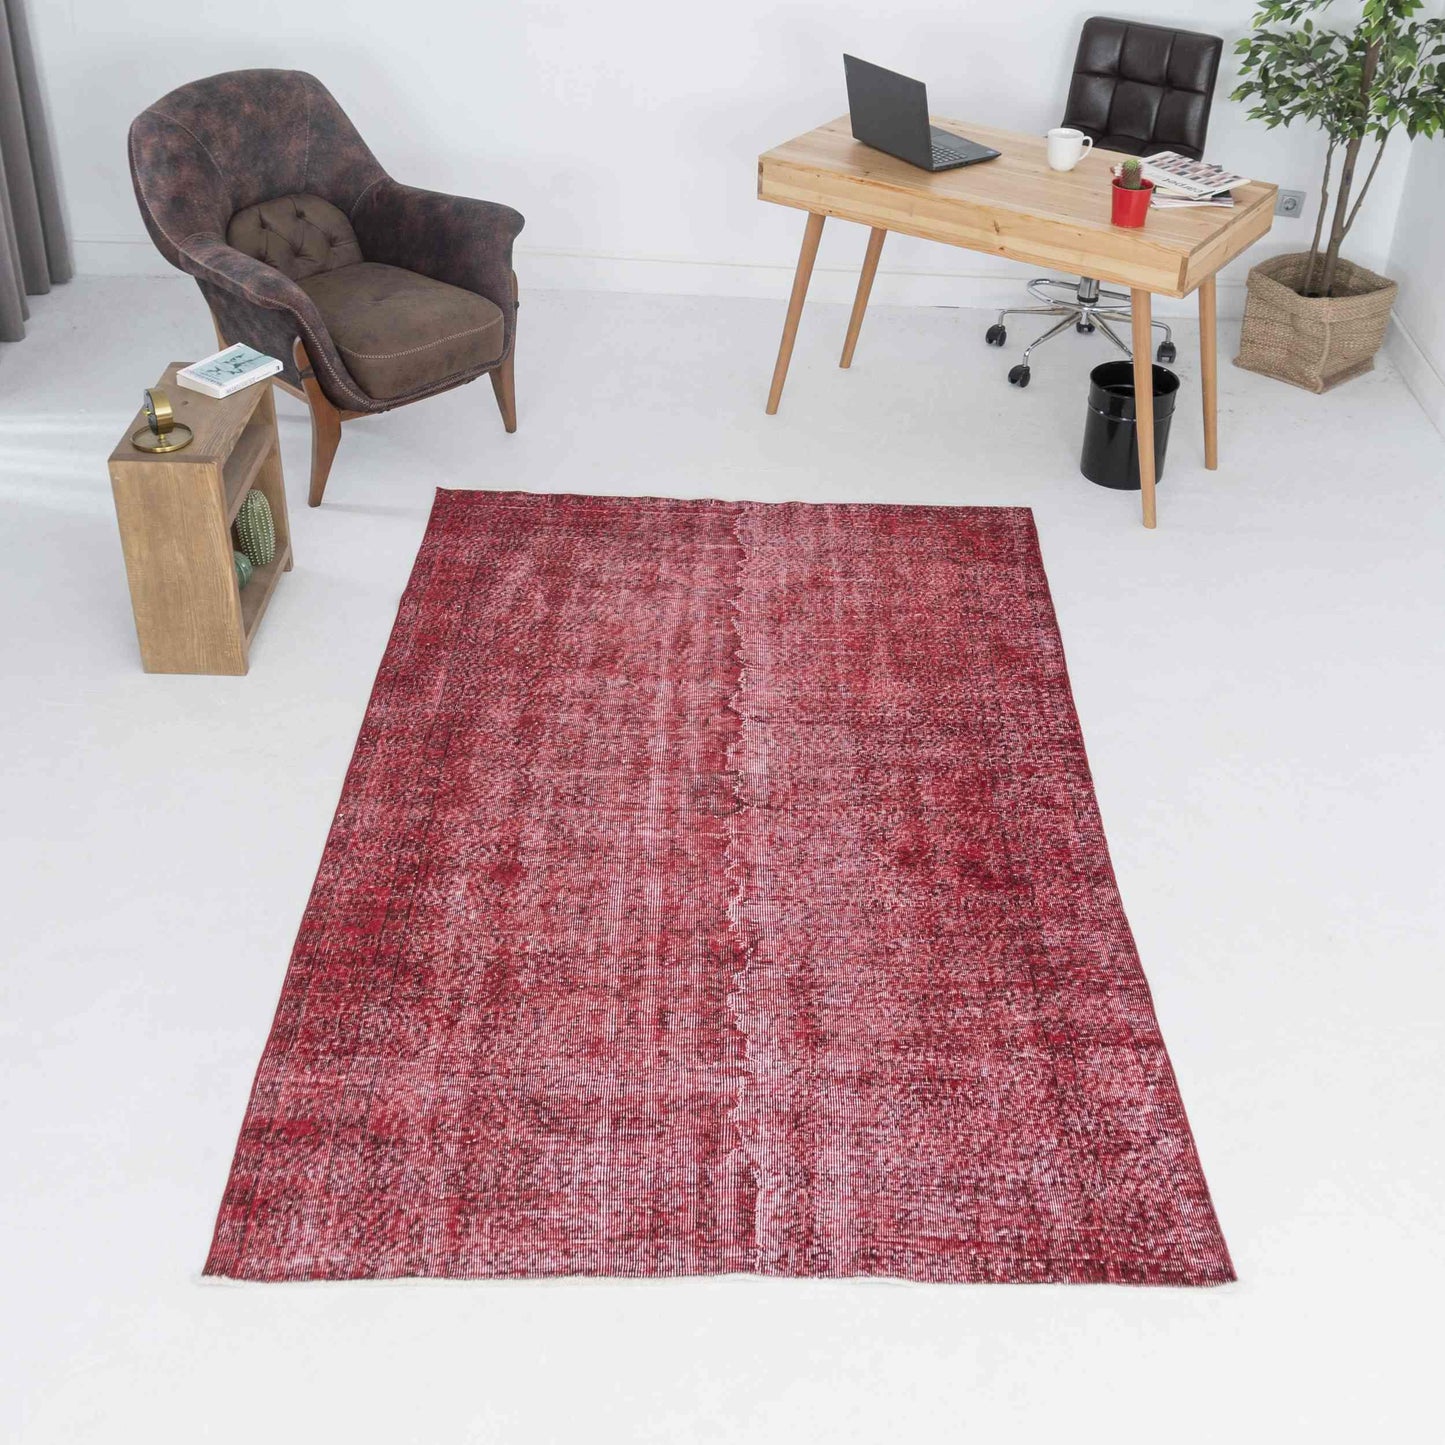 Oriental Rug Vintage Hand Knotted Wool On Cotton 156 x 258 Cm - 5' 2'' x 8' 6'' Red C014 ER12